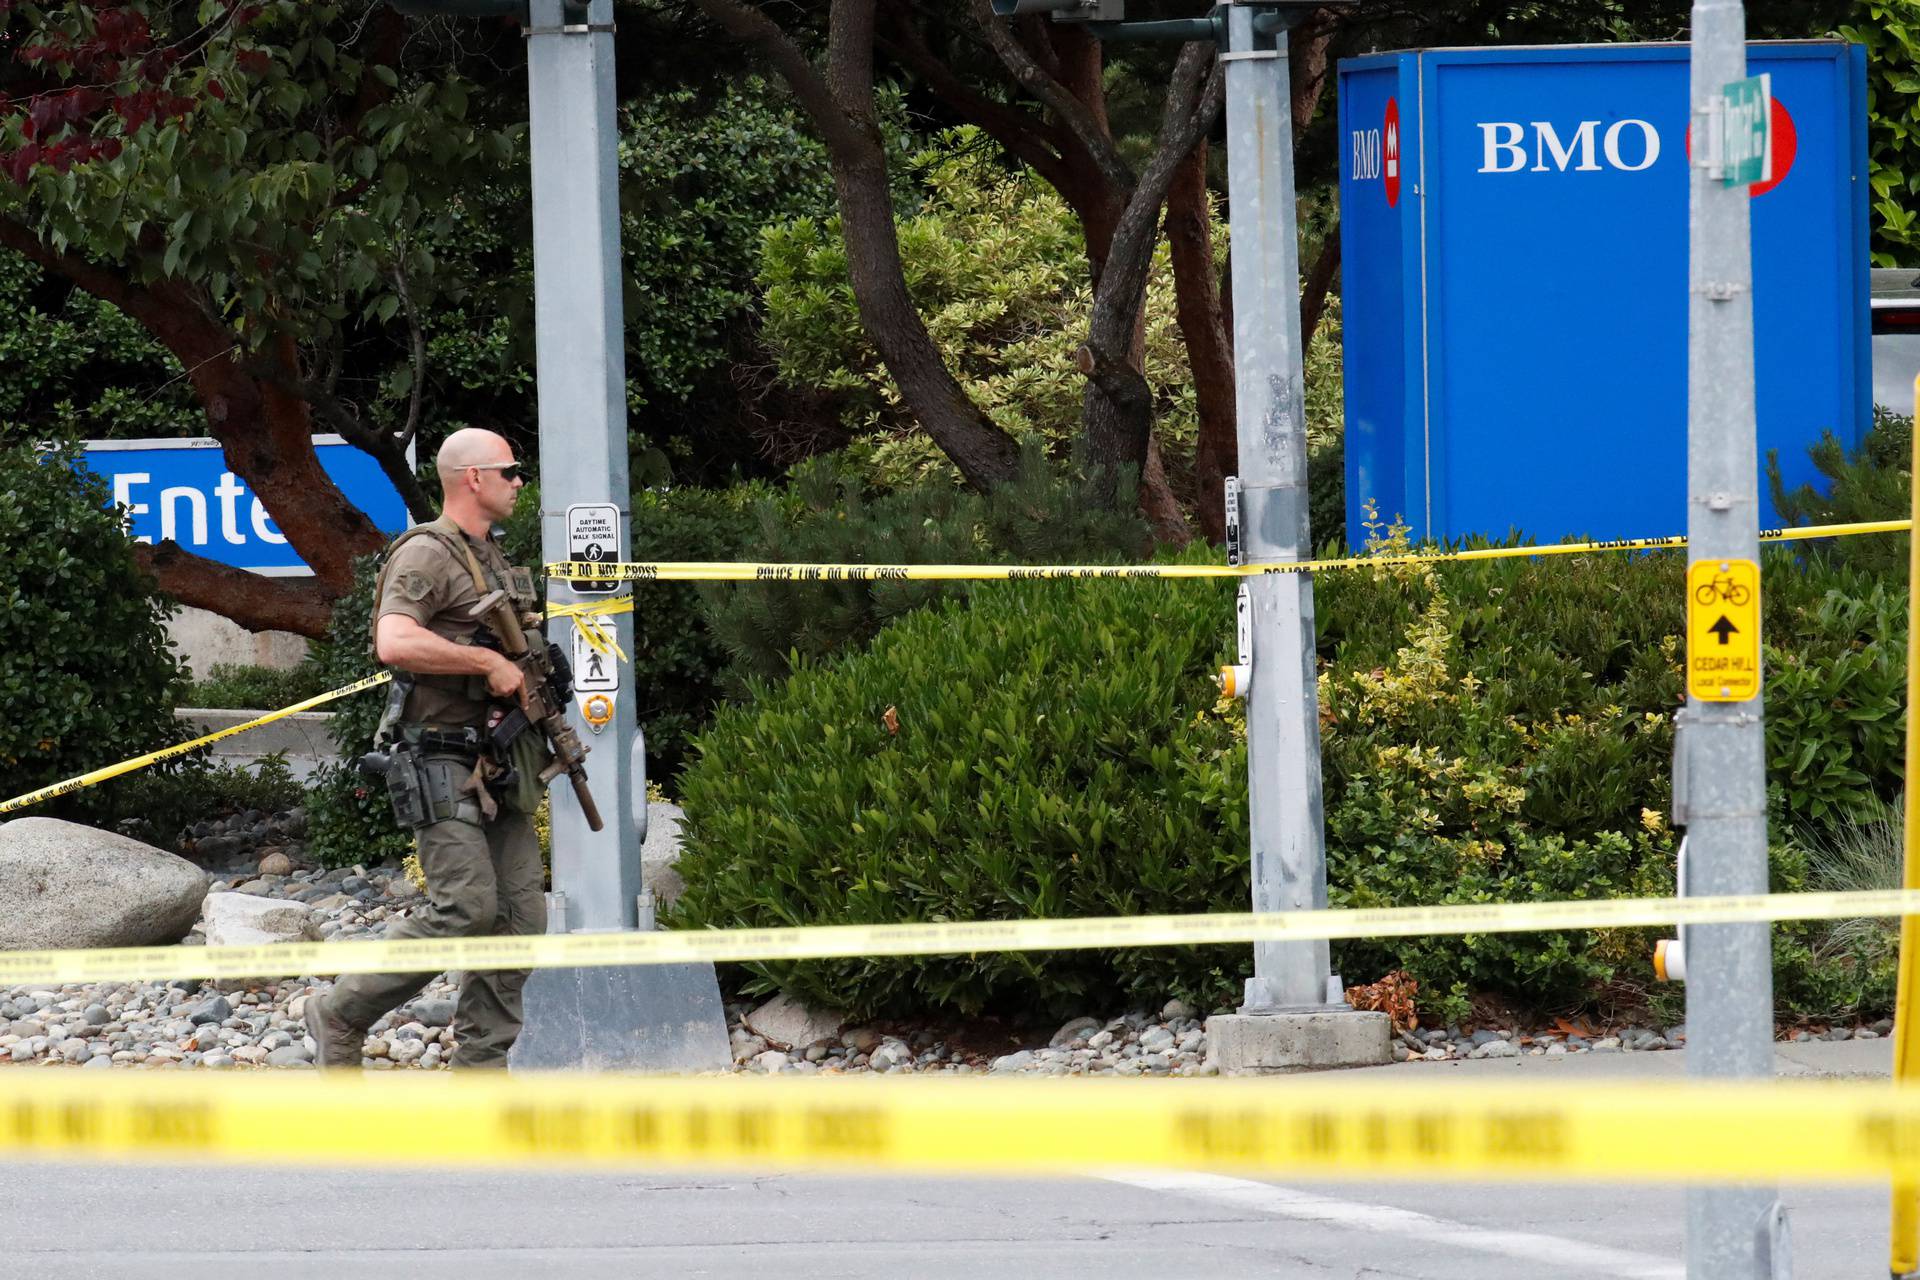 A police officer looks on after two armed men entering a bank were killed in a shootout with the police in Saanich